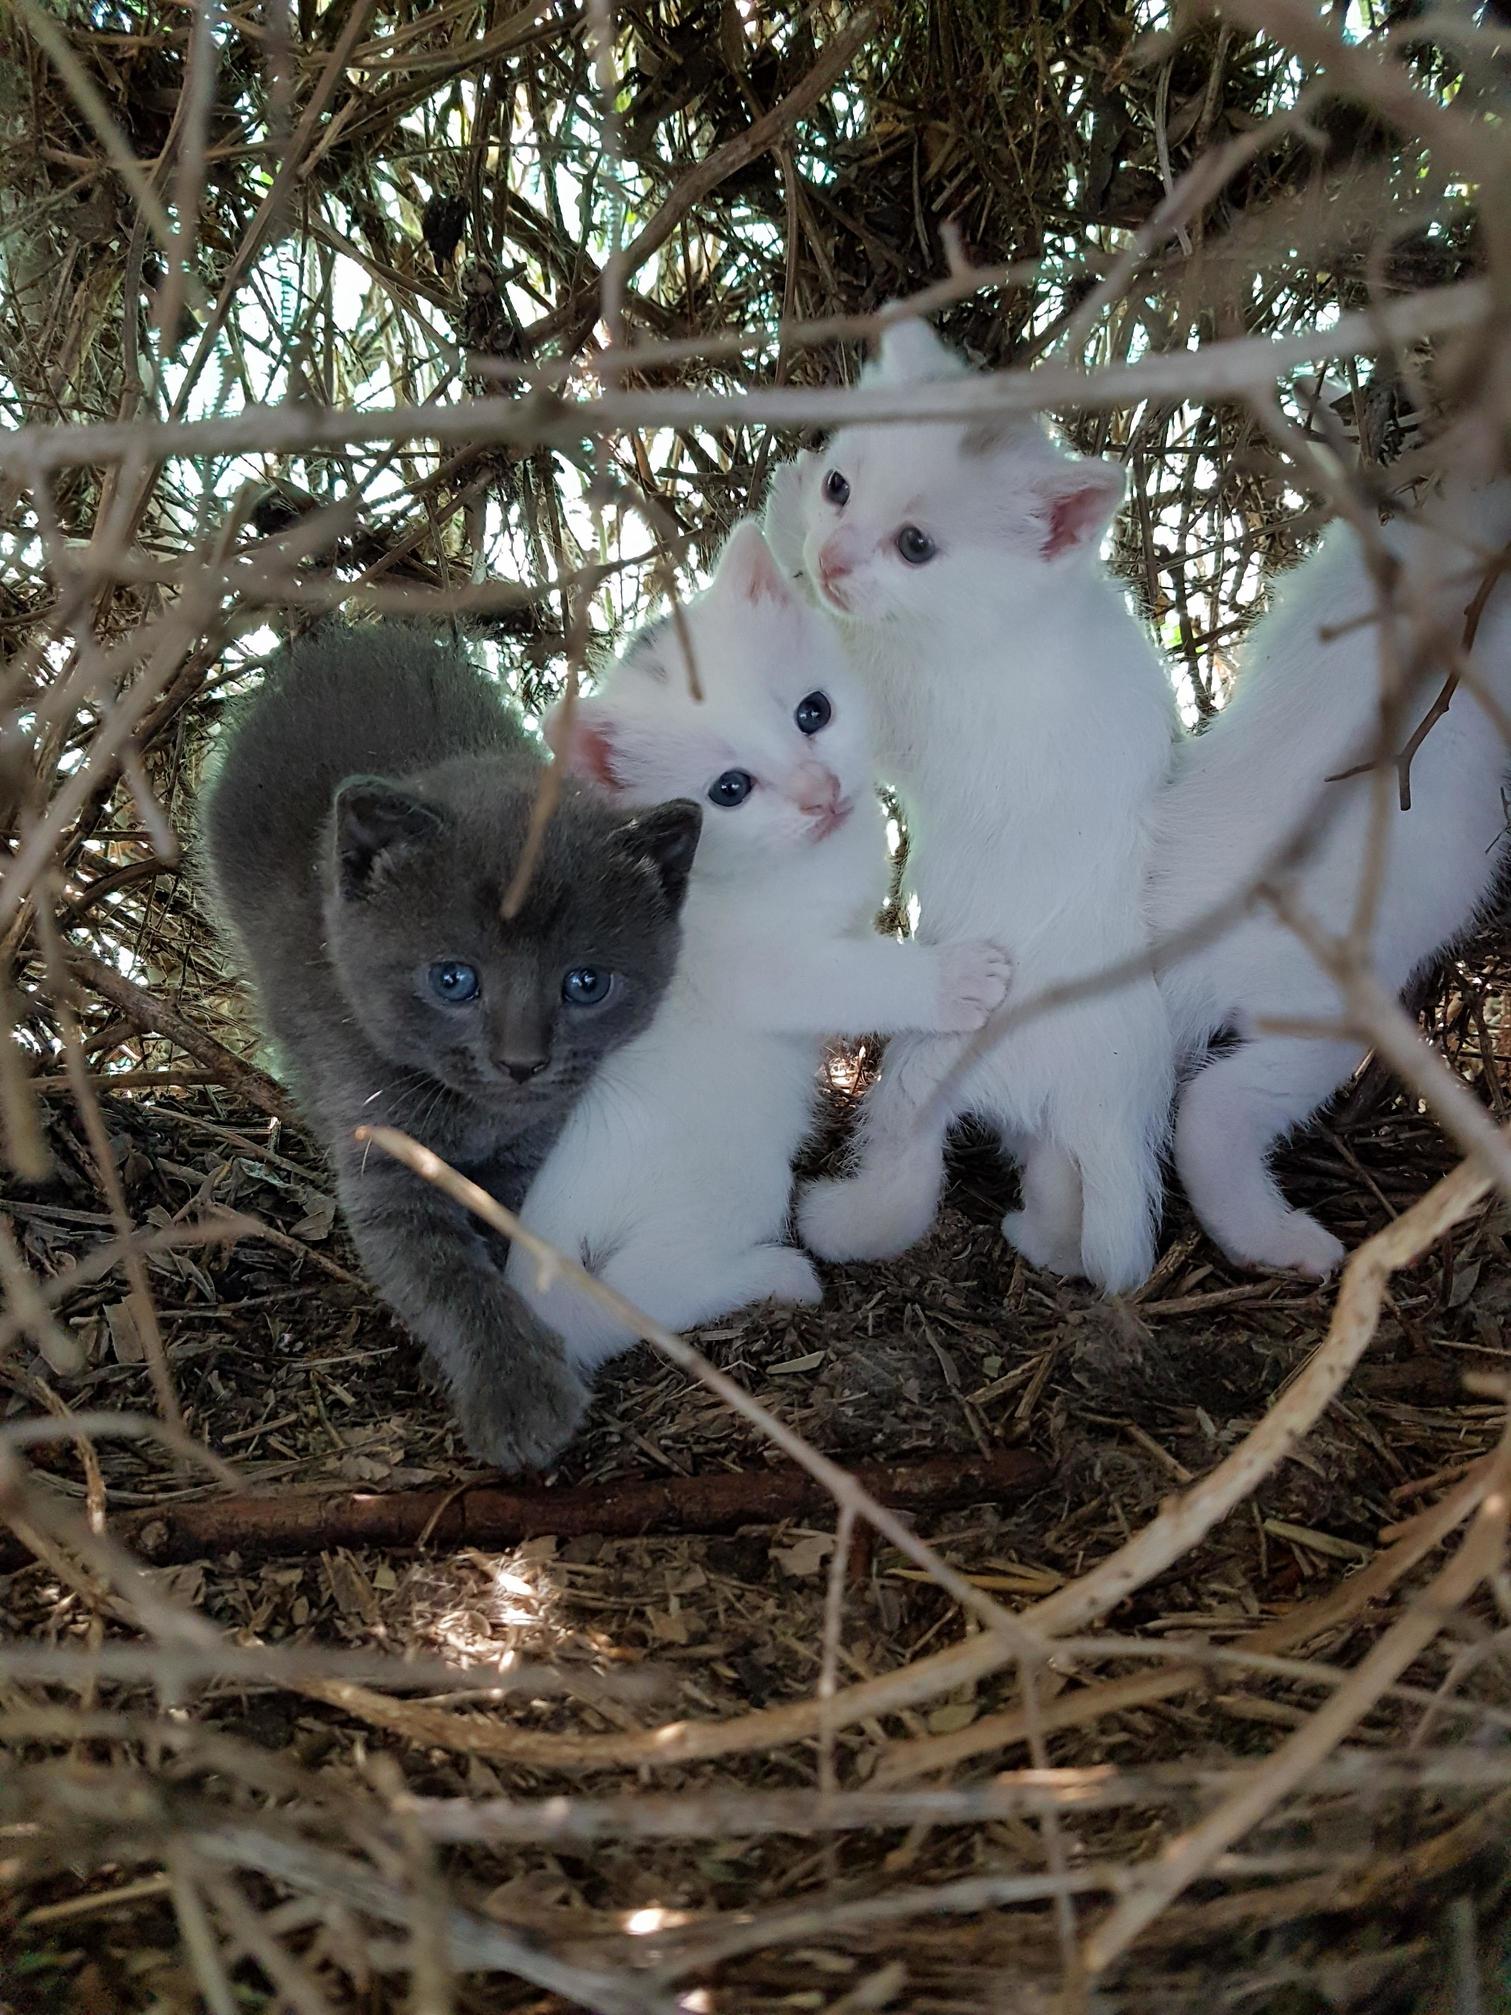 Just found this 4 kitties next to home.